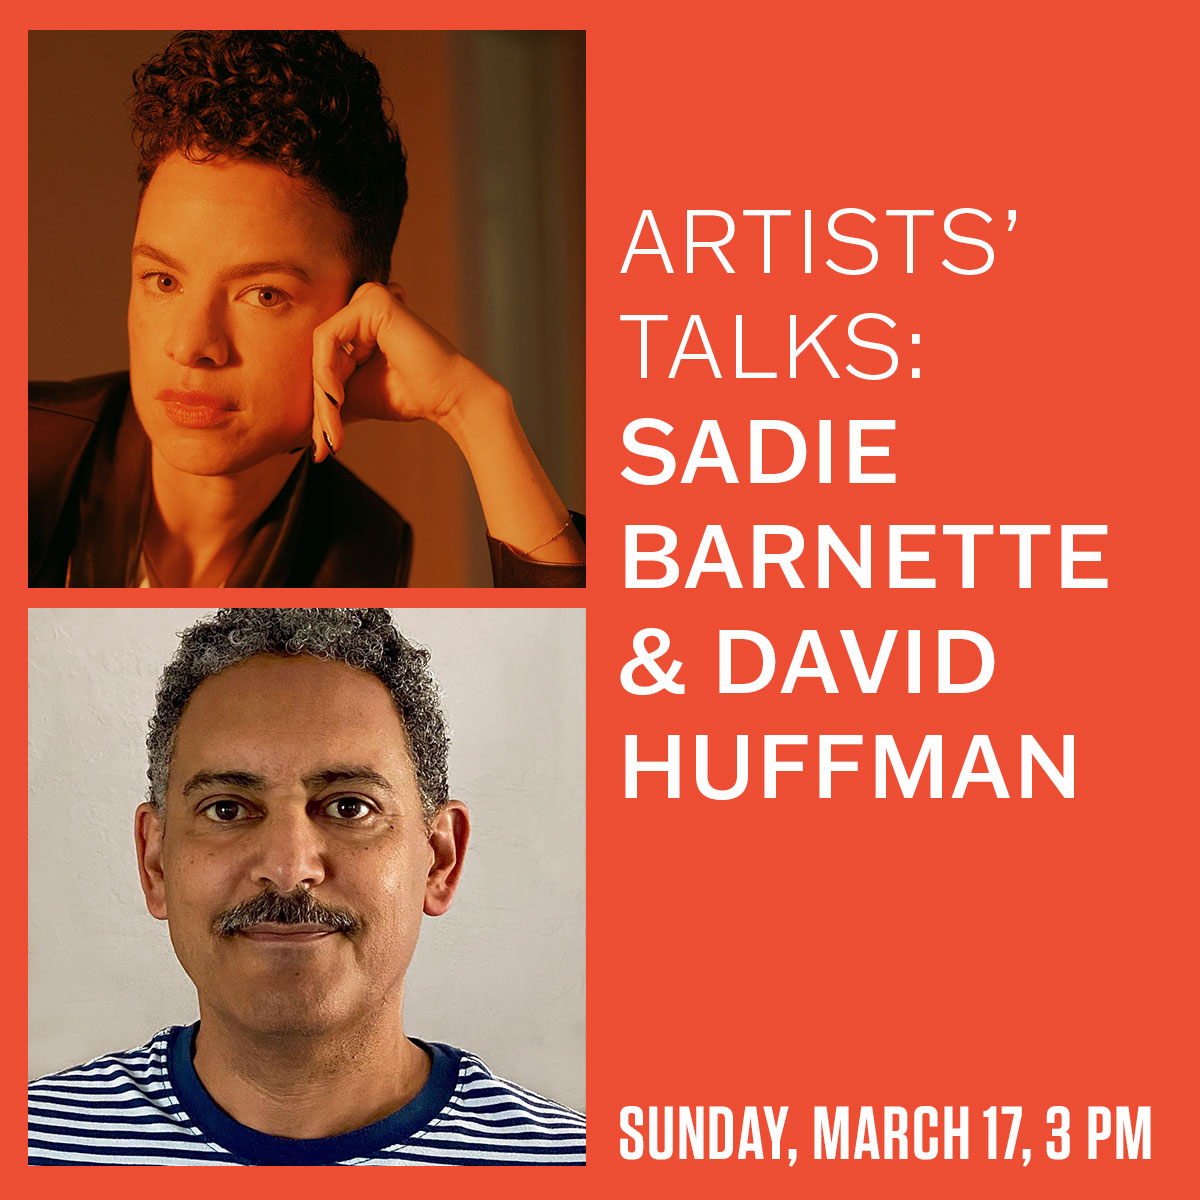 Tomorrow @ 3 PM: Bay Area artists Sadie Barnette and David Huffman continue our series of collection show Artists' Talks. They will discuss their influences, artistic practice, and the work currently on view in our galleries. bampfa.org/event/artists-…